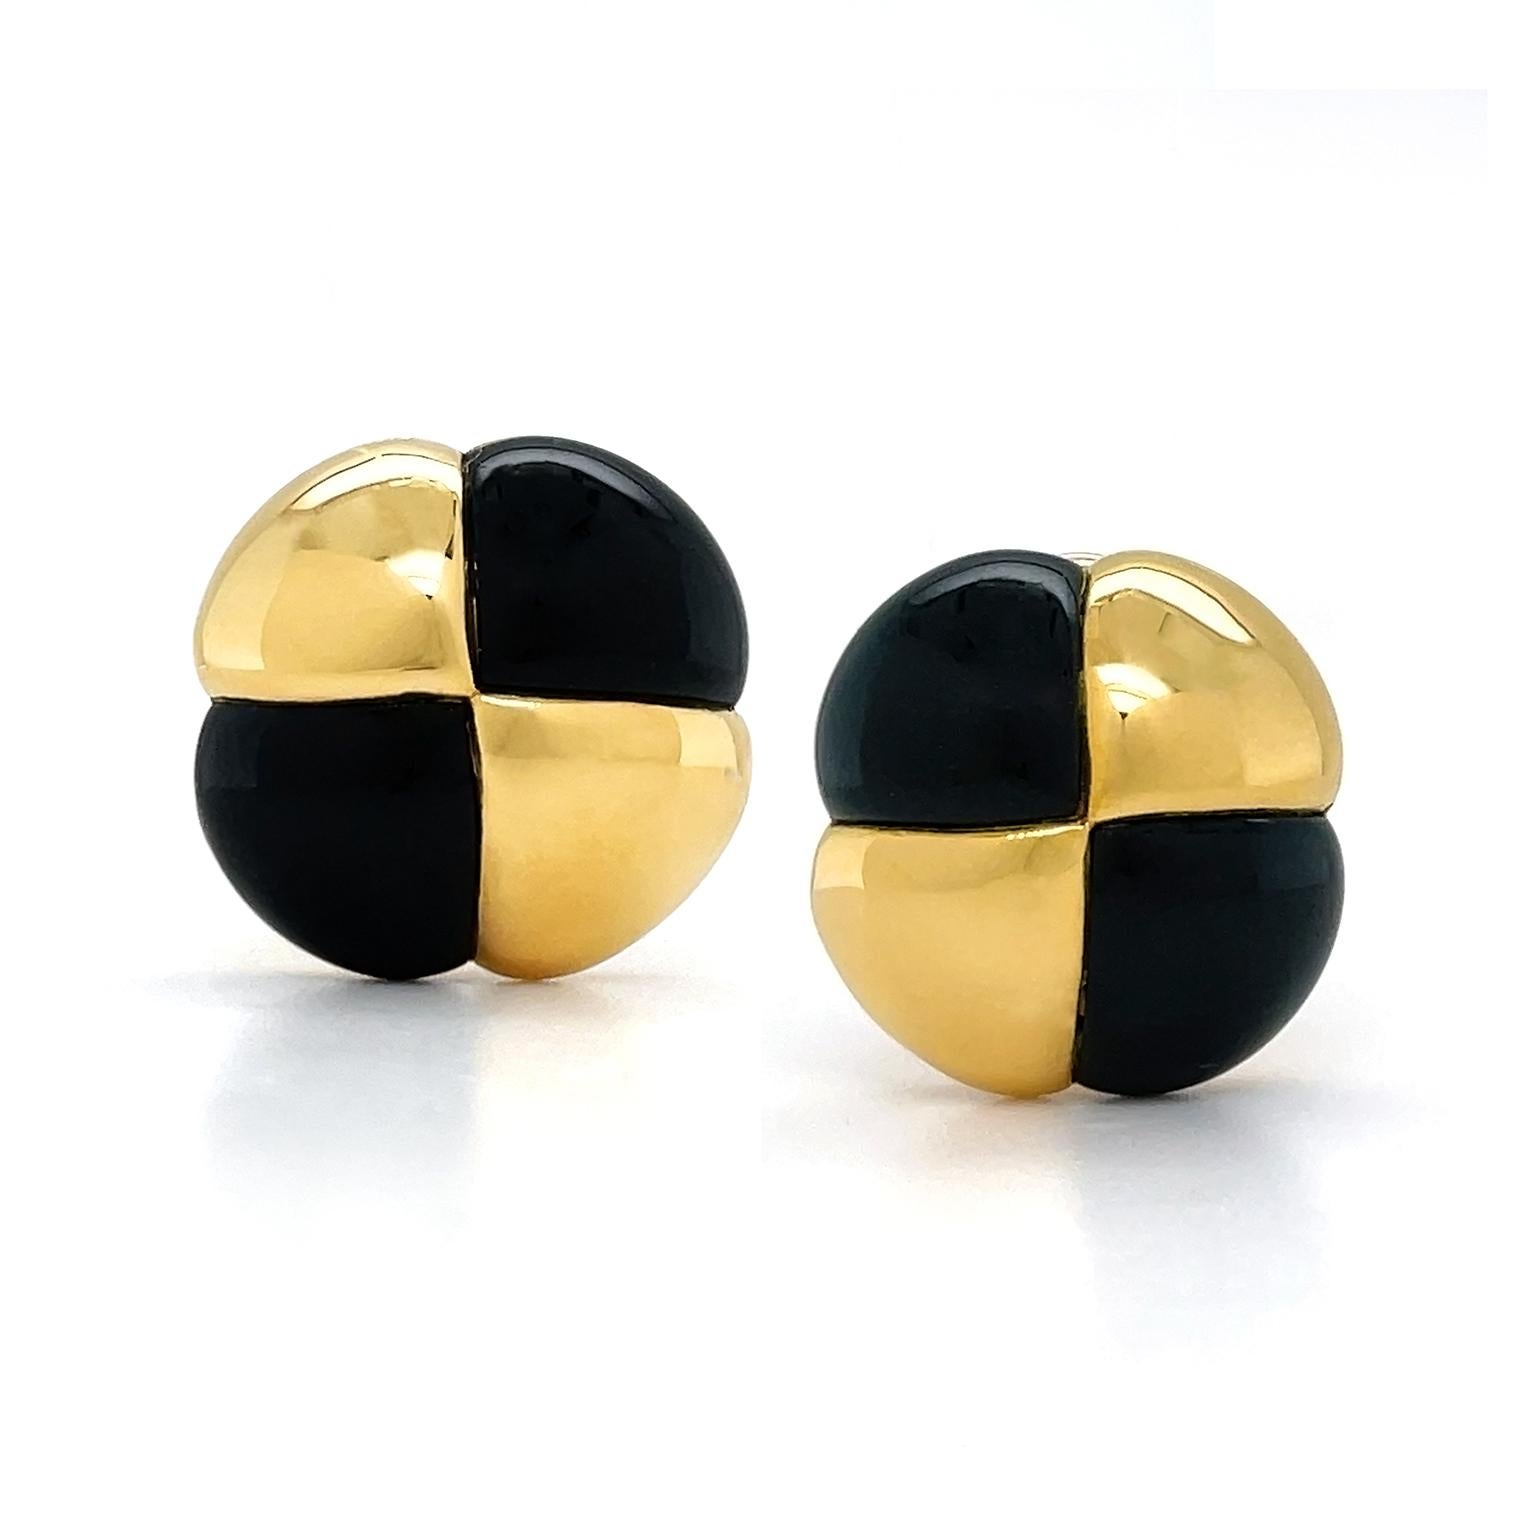 A checkerboard design is created by the highlight to black jade. Black jade carved into wedges with a rounded top are embedded with polished 18k yellow gold in the same cut. Together, the yellow gold brings light and the black jade brings